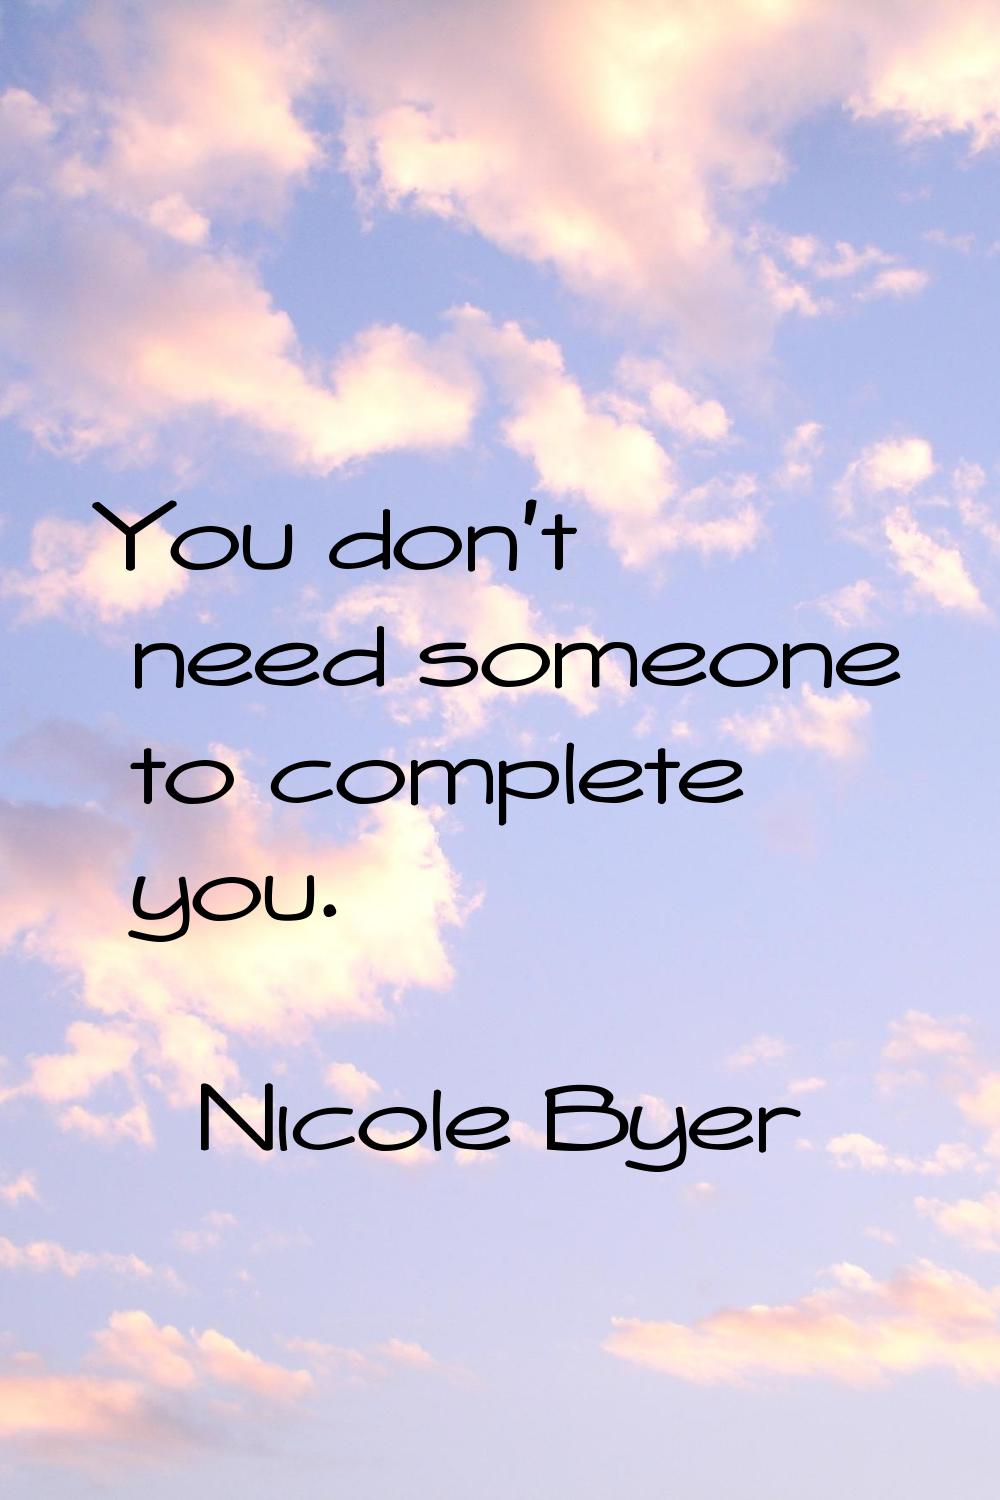 You don't need someone to complete you.